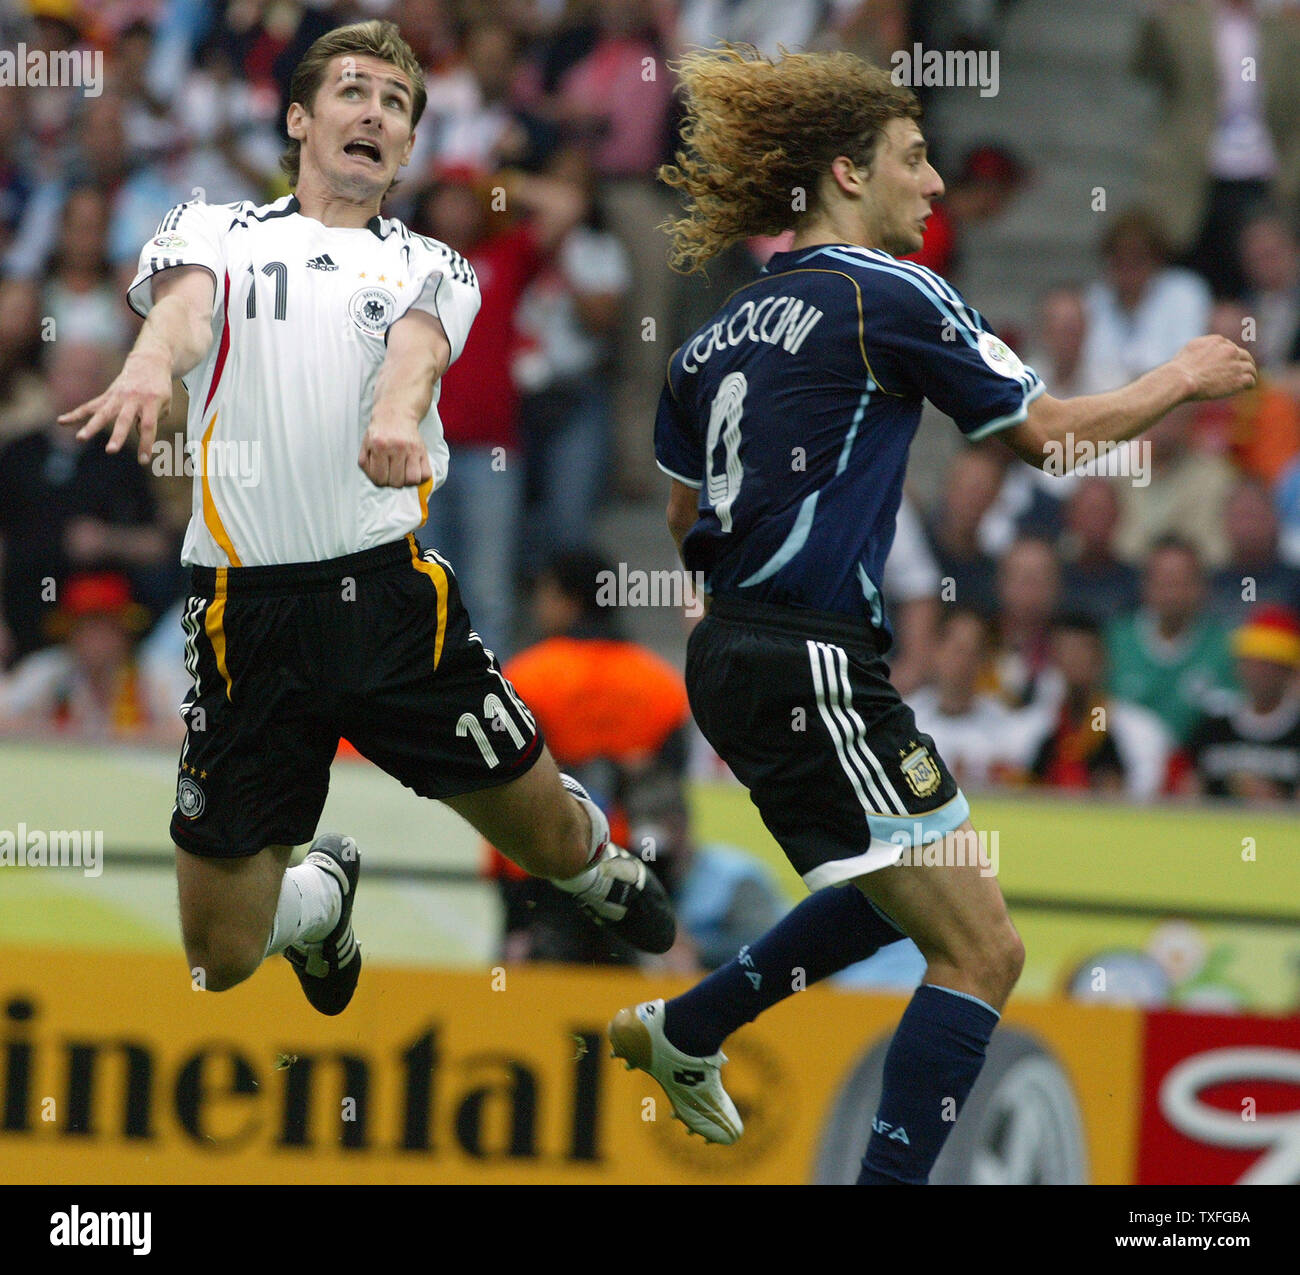 Miroslav Klose of Germany (11) heads the ball against Argentina's Fabricio Coloccini (4) during World Cup soccer at Olympiastadion on Friday, June 30, 2006 in Berlin, Germany. Germany defeated Argentina 4-2.   (UPI Photo/Arthur Thill) Stock Photo